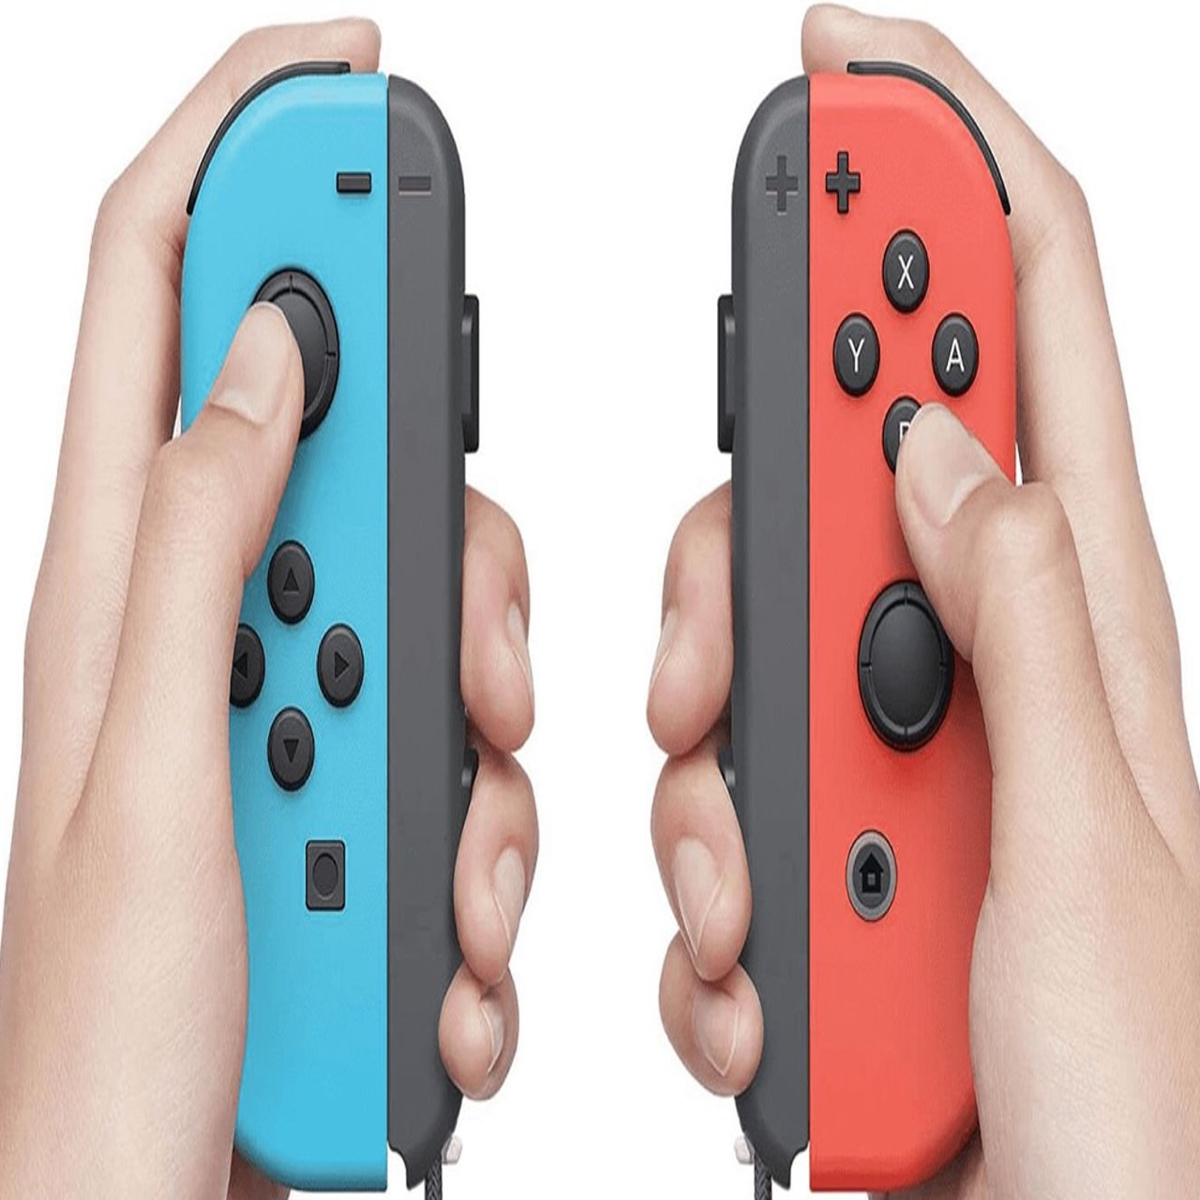 Steam Joy-Con support rounds out Nintendo controller lineup